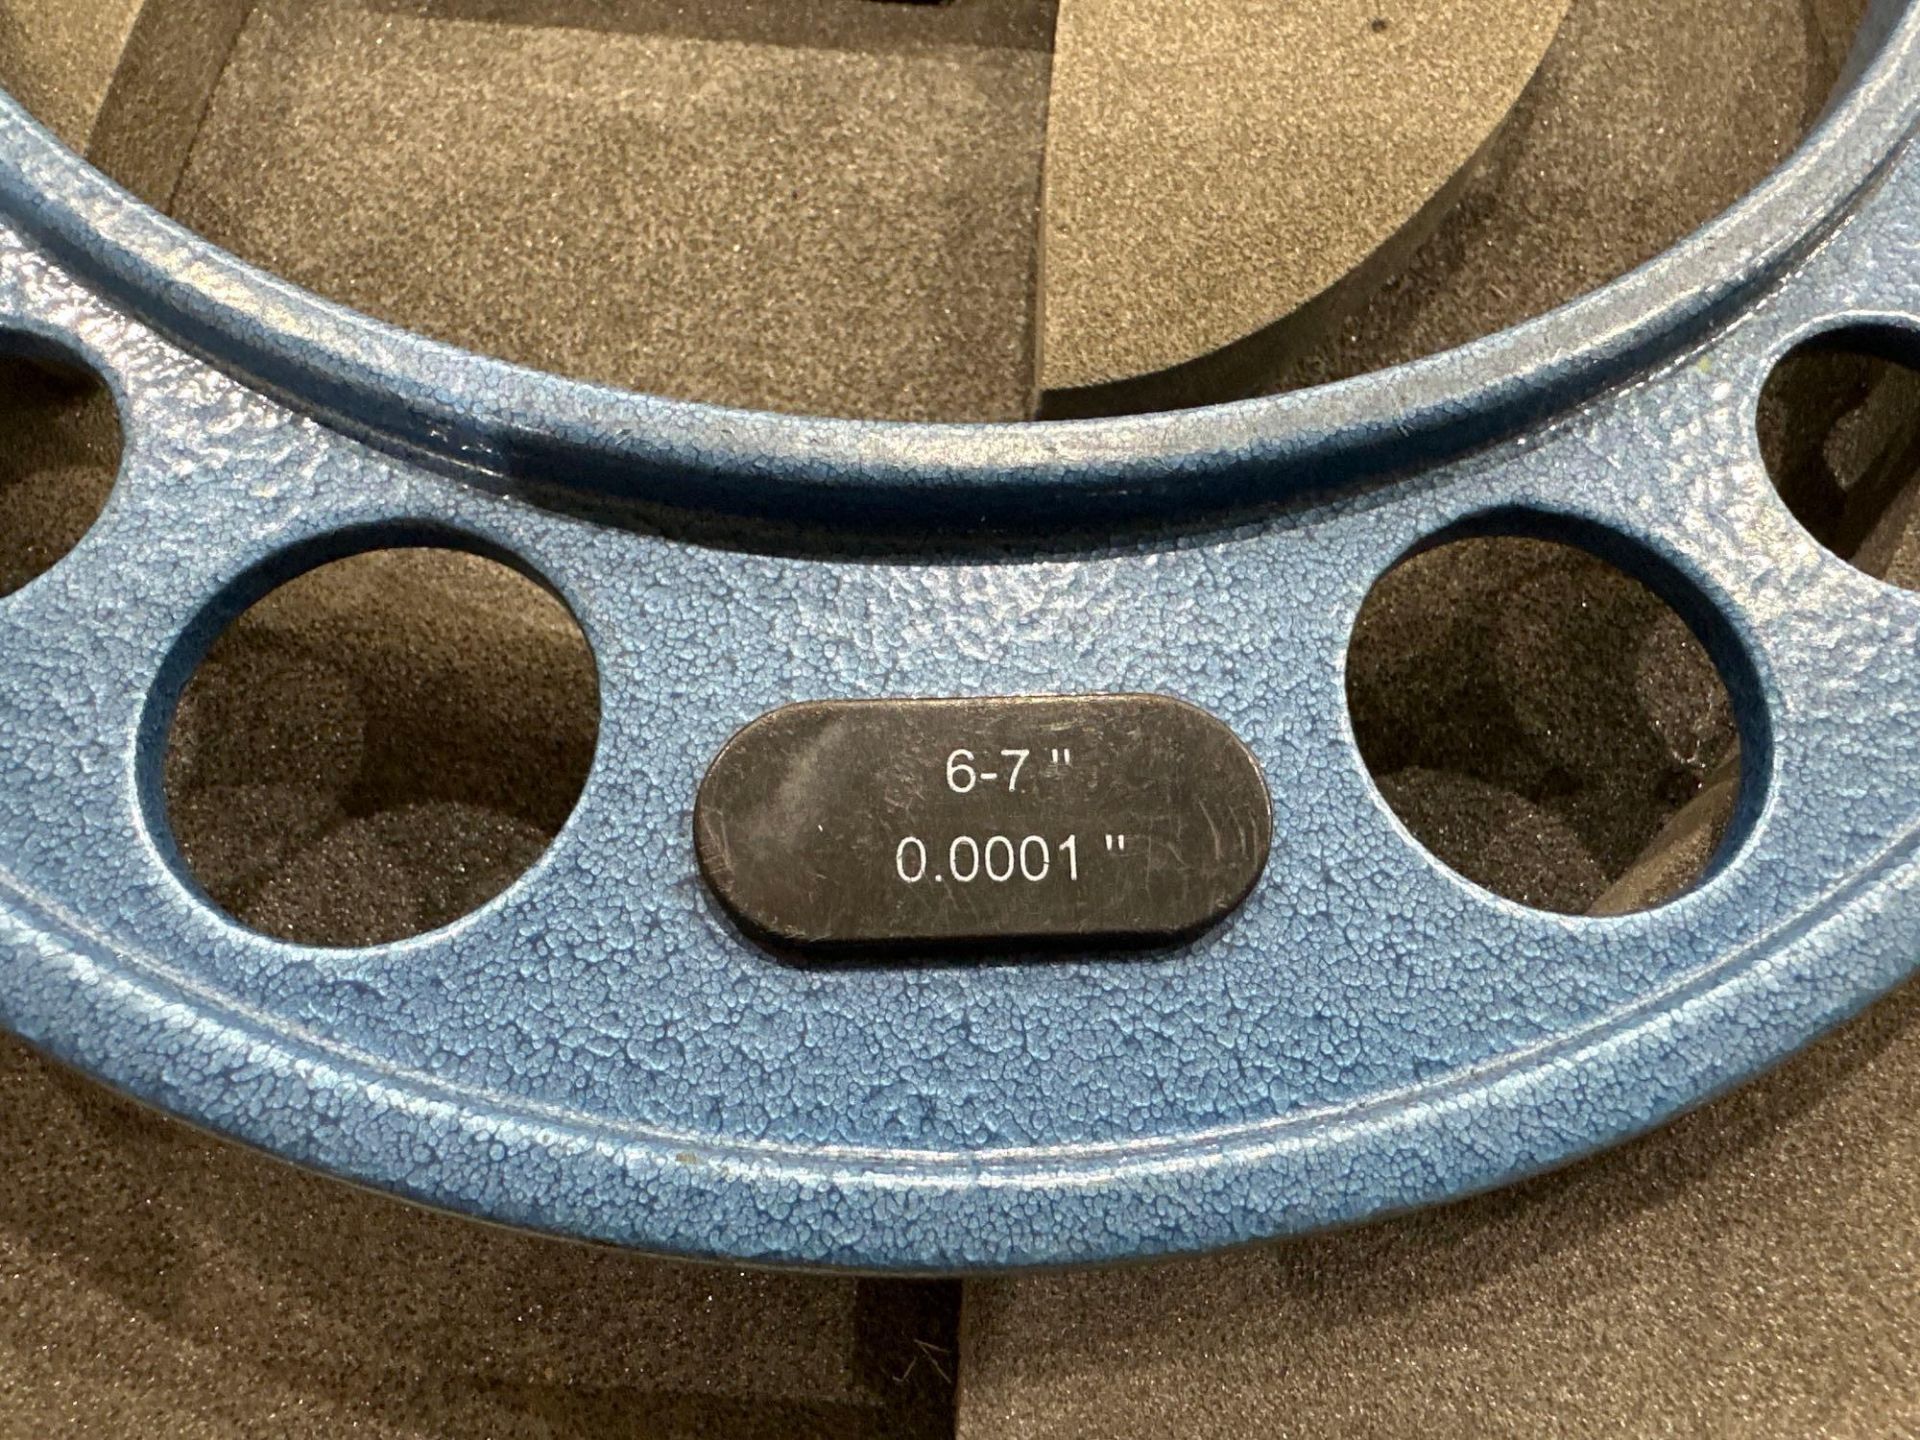 Fowler OD Micrometer No 52-240 Series, 6–7” Range, 0.0001” Graduation in wood case. See photo. - Image 5 of 6